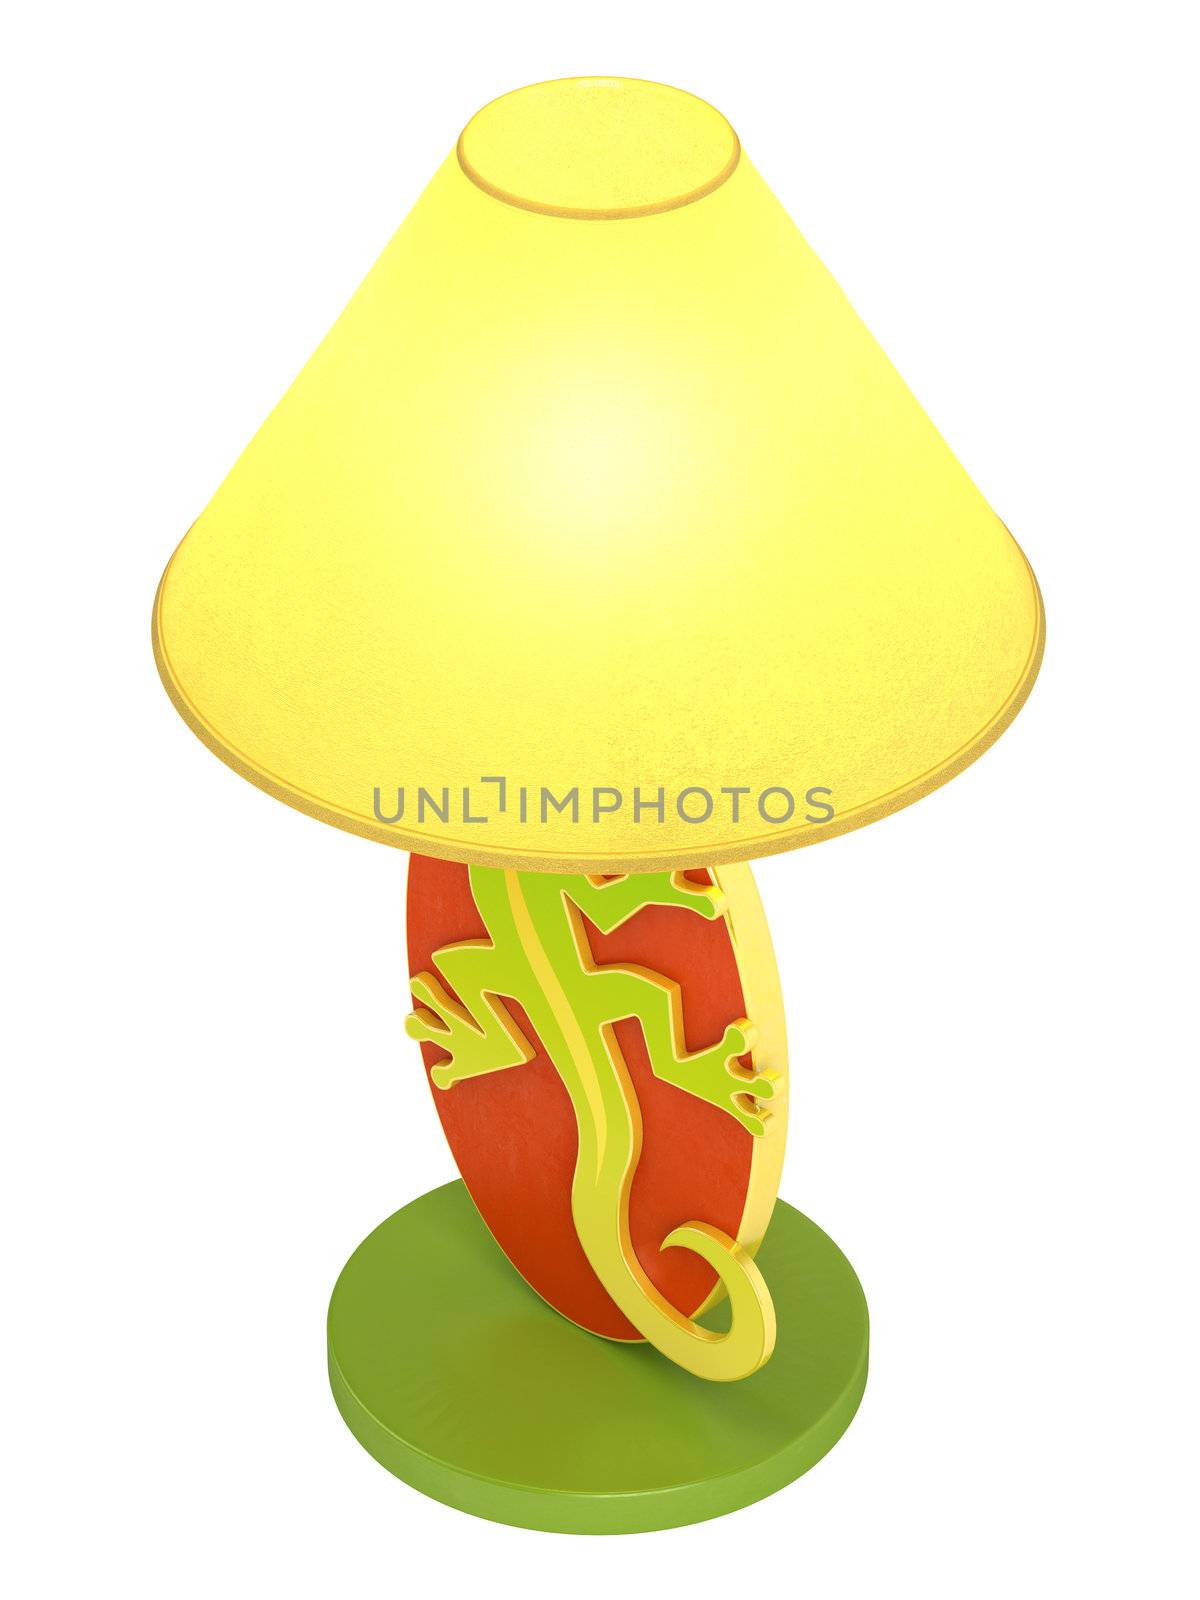 Modern colourful wooden lamp with an oval base with a lizard cutout and a cheerful yellow lampshade isolated on white